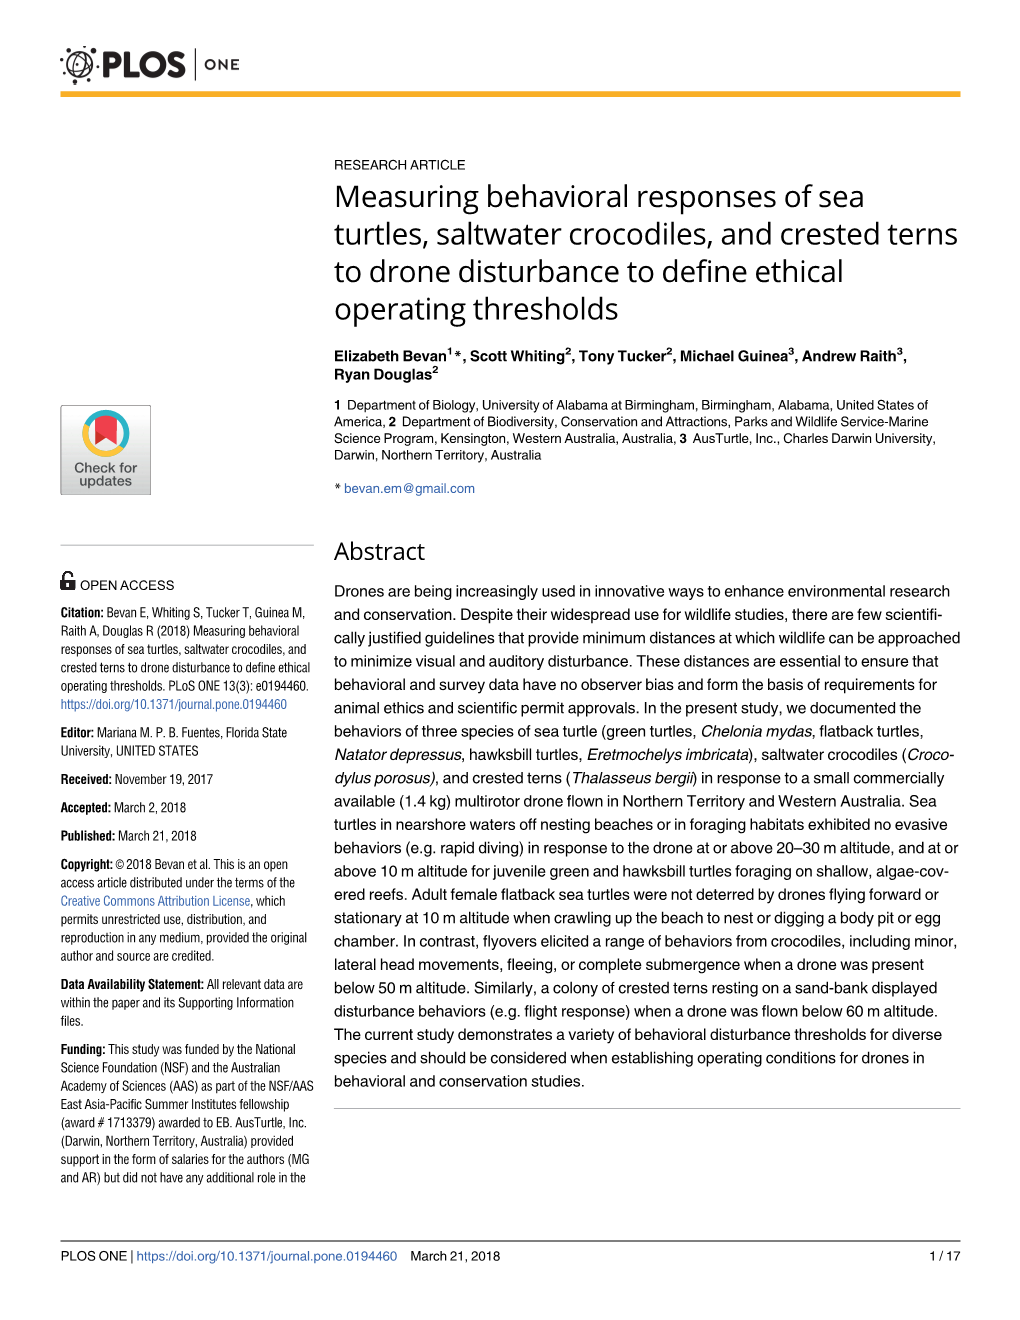 Measuring Behavioral Responses of Sea Turtles, Saltwater Crocodiles, and Crested Terns to Drone Disturbance to Define Ethical Operating Thresholds